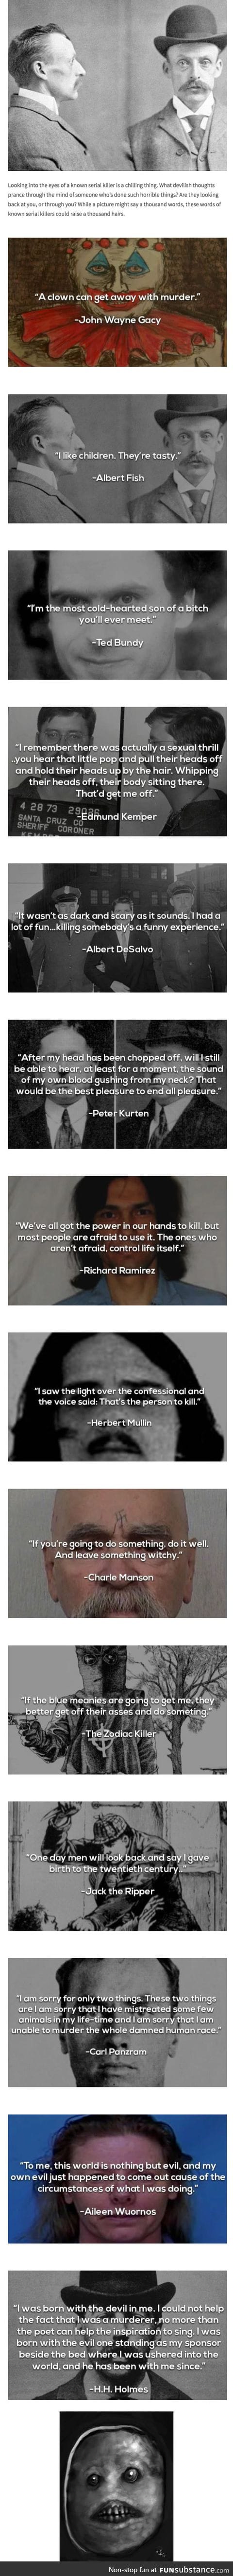 14 Hair-raising quotes from serial killers